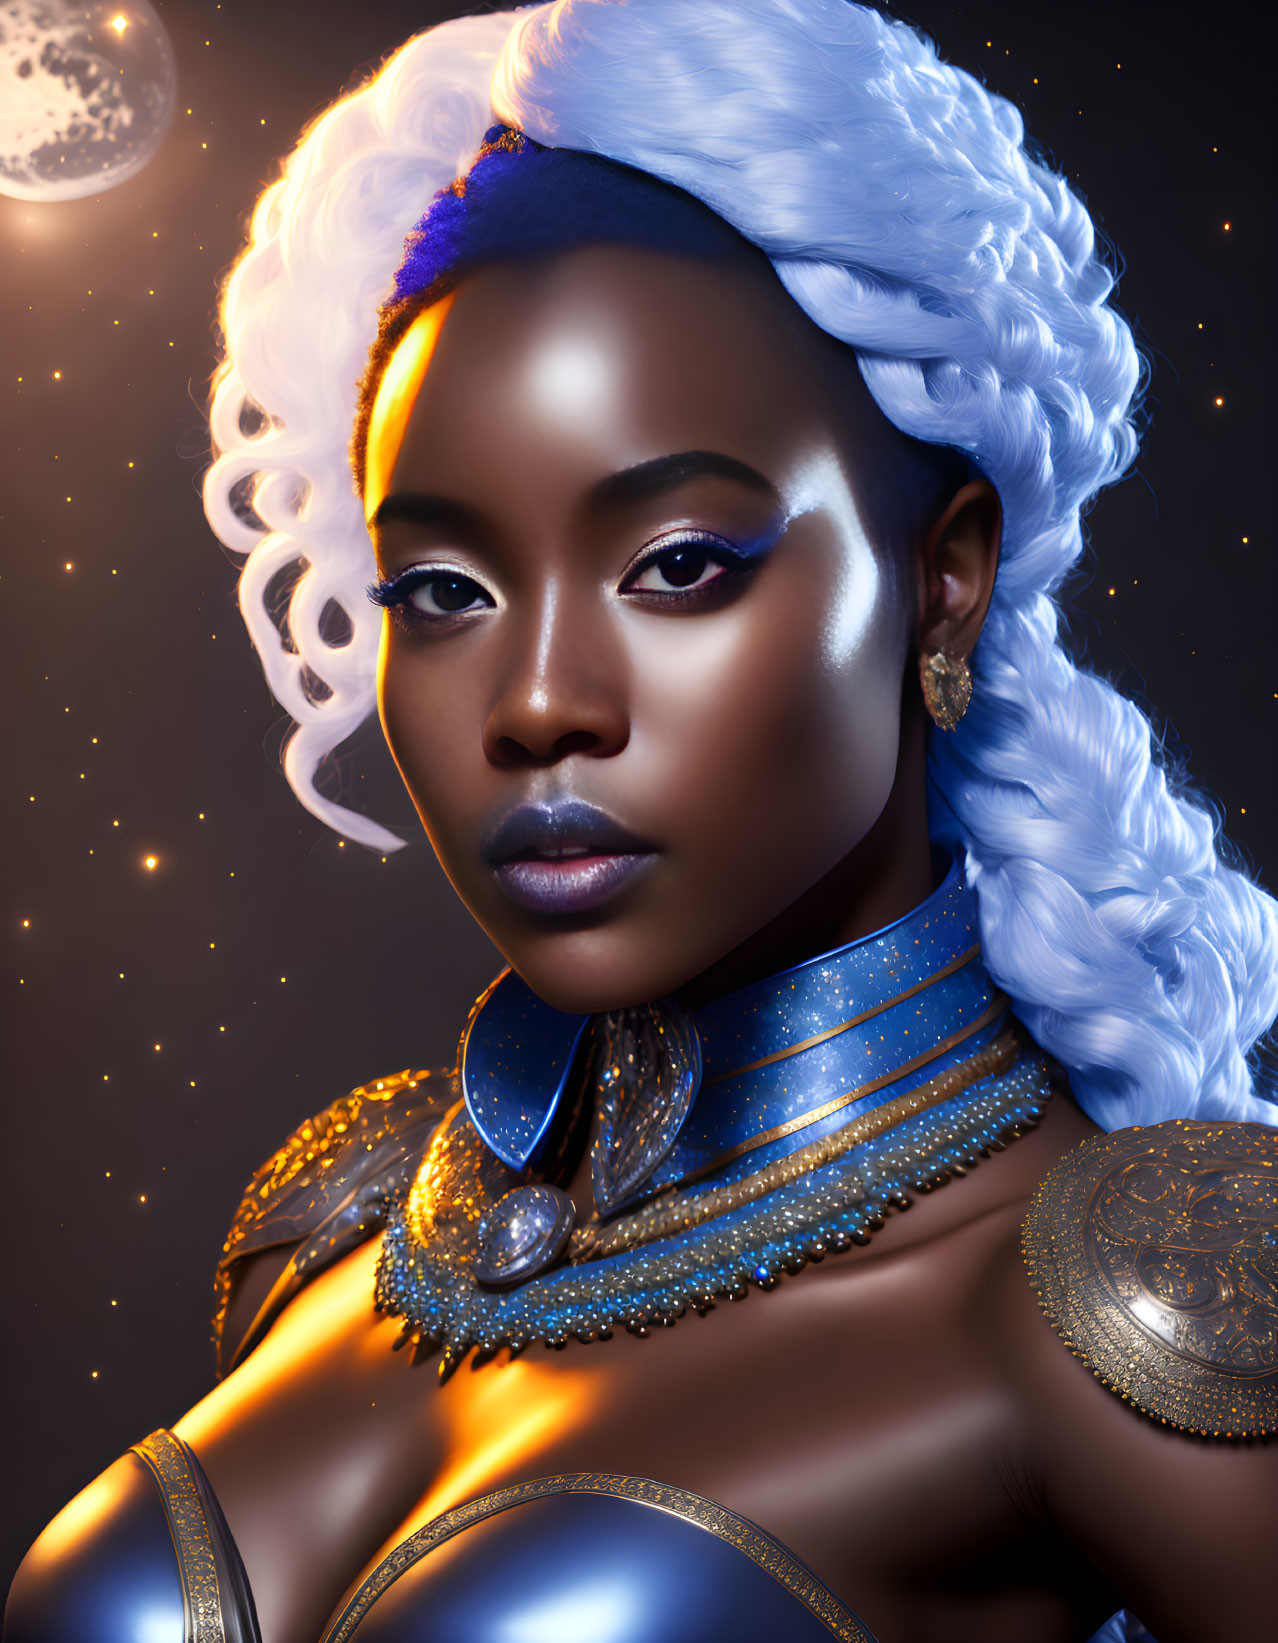 Futuristic woman portrait in blue and gold tones on dark background